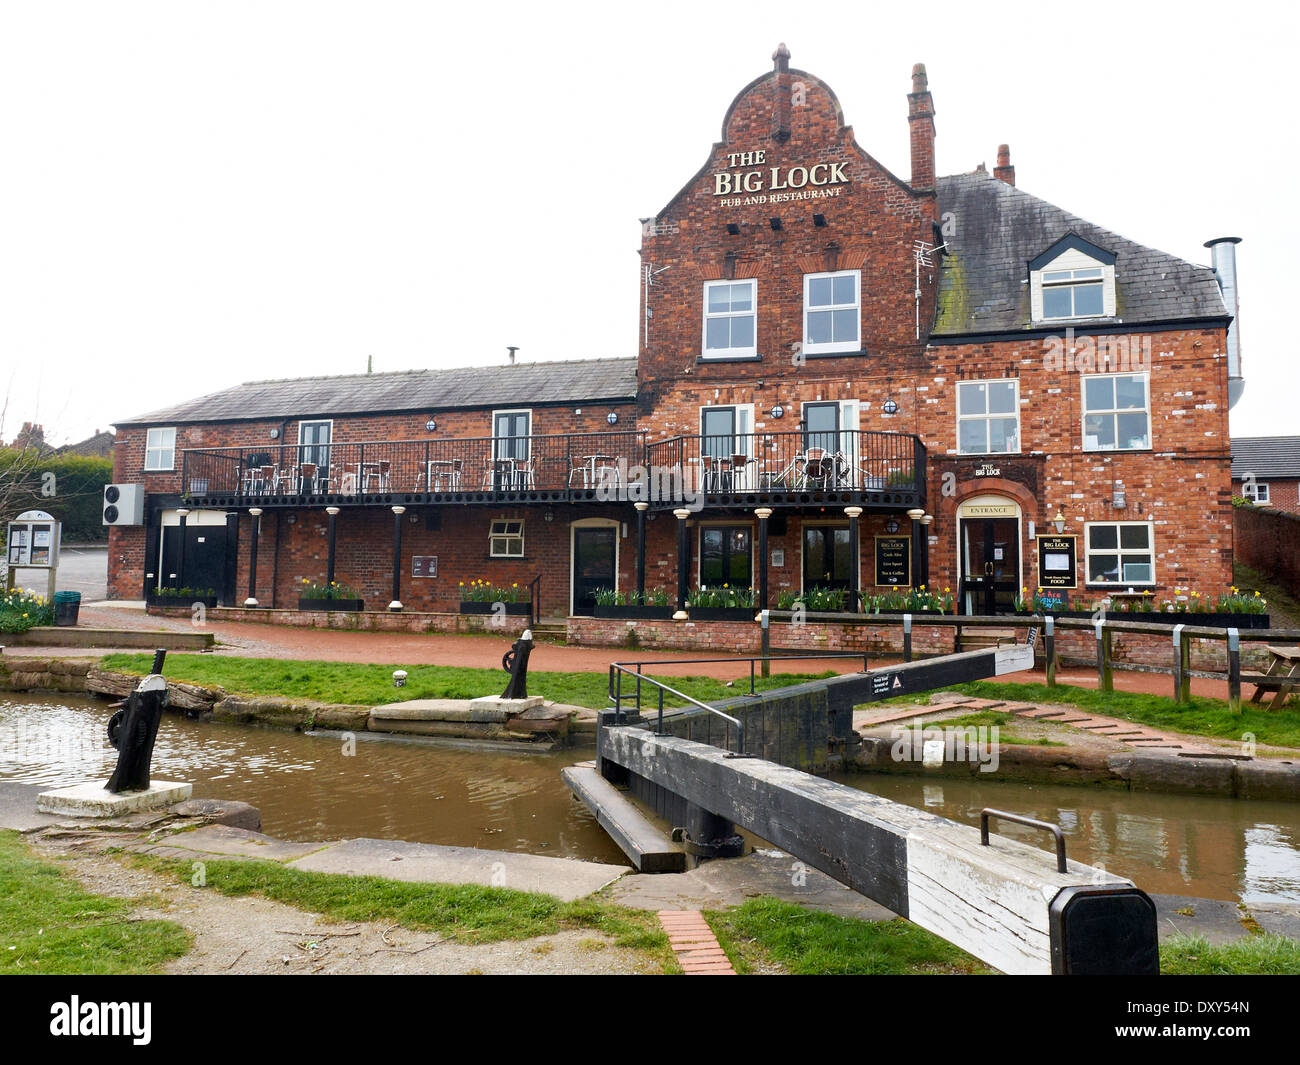 The Big Lock pub and restaurant on the Trent and Mersey canal in Middlewich Cheshire UK Stock Photo